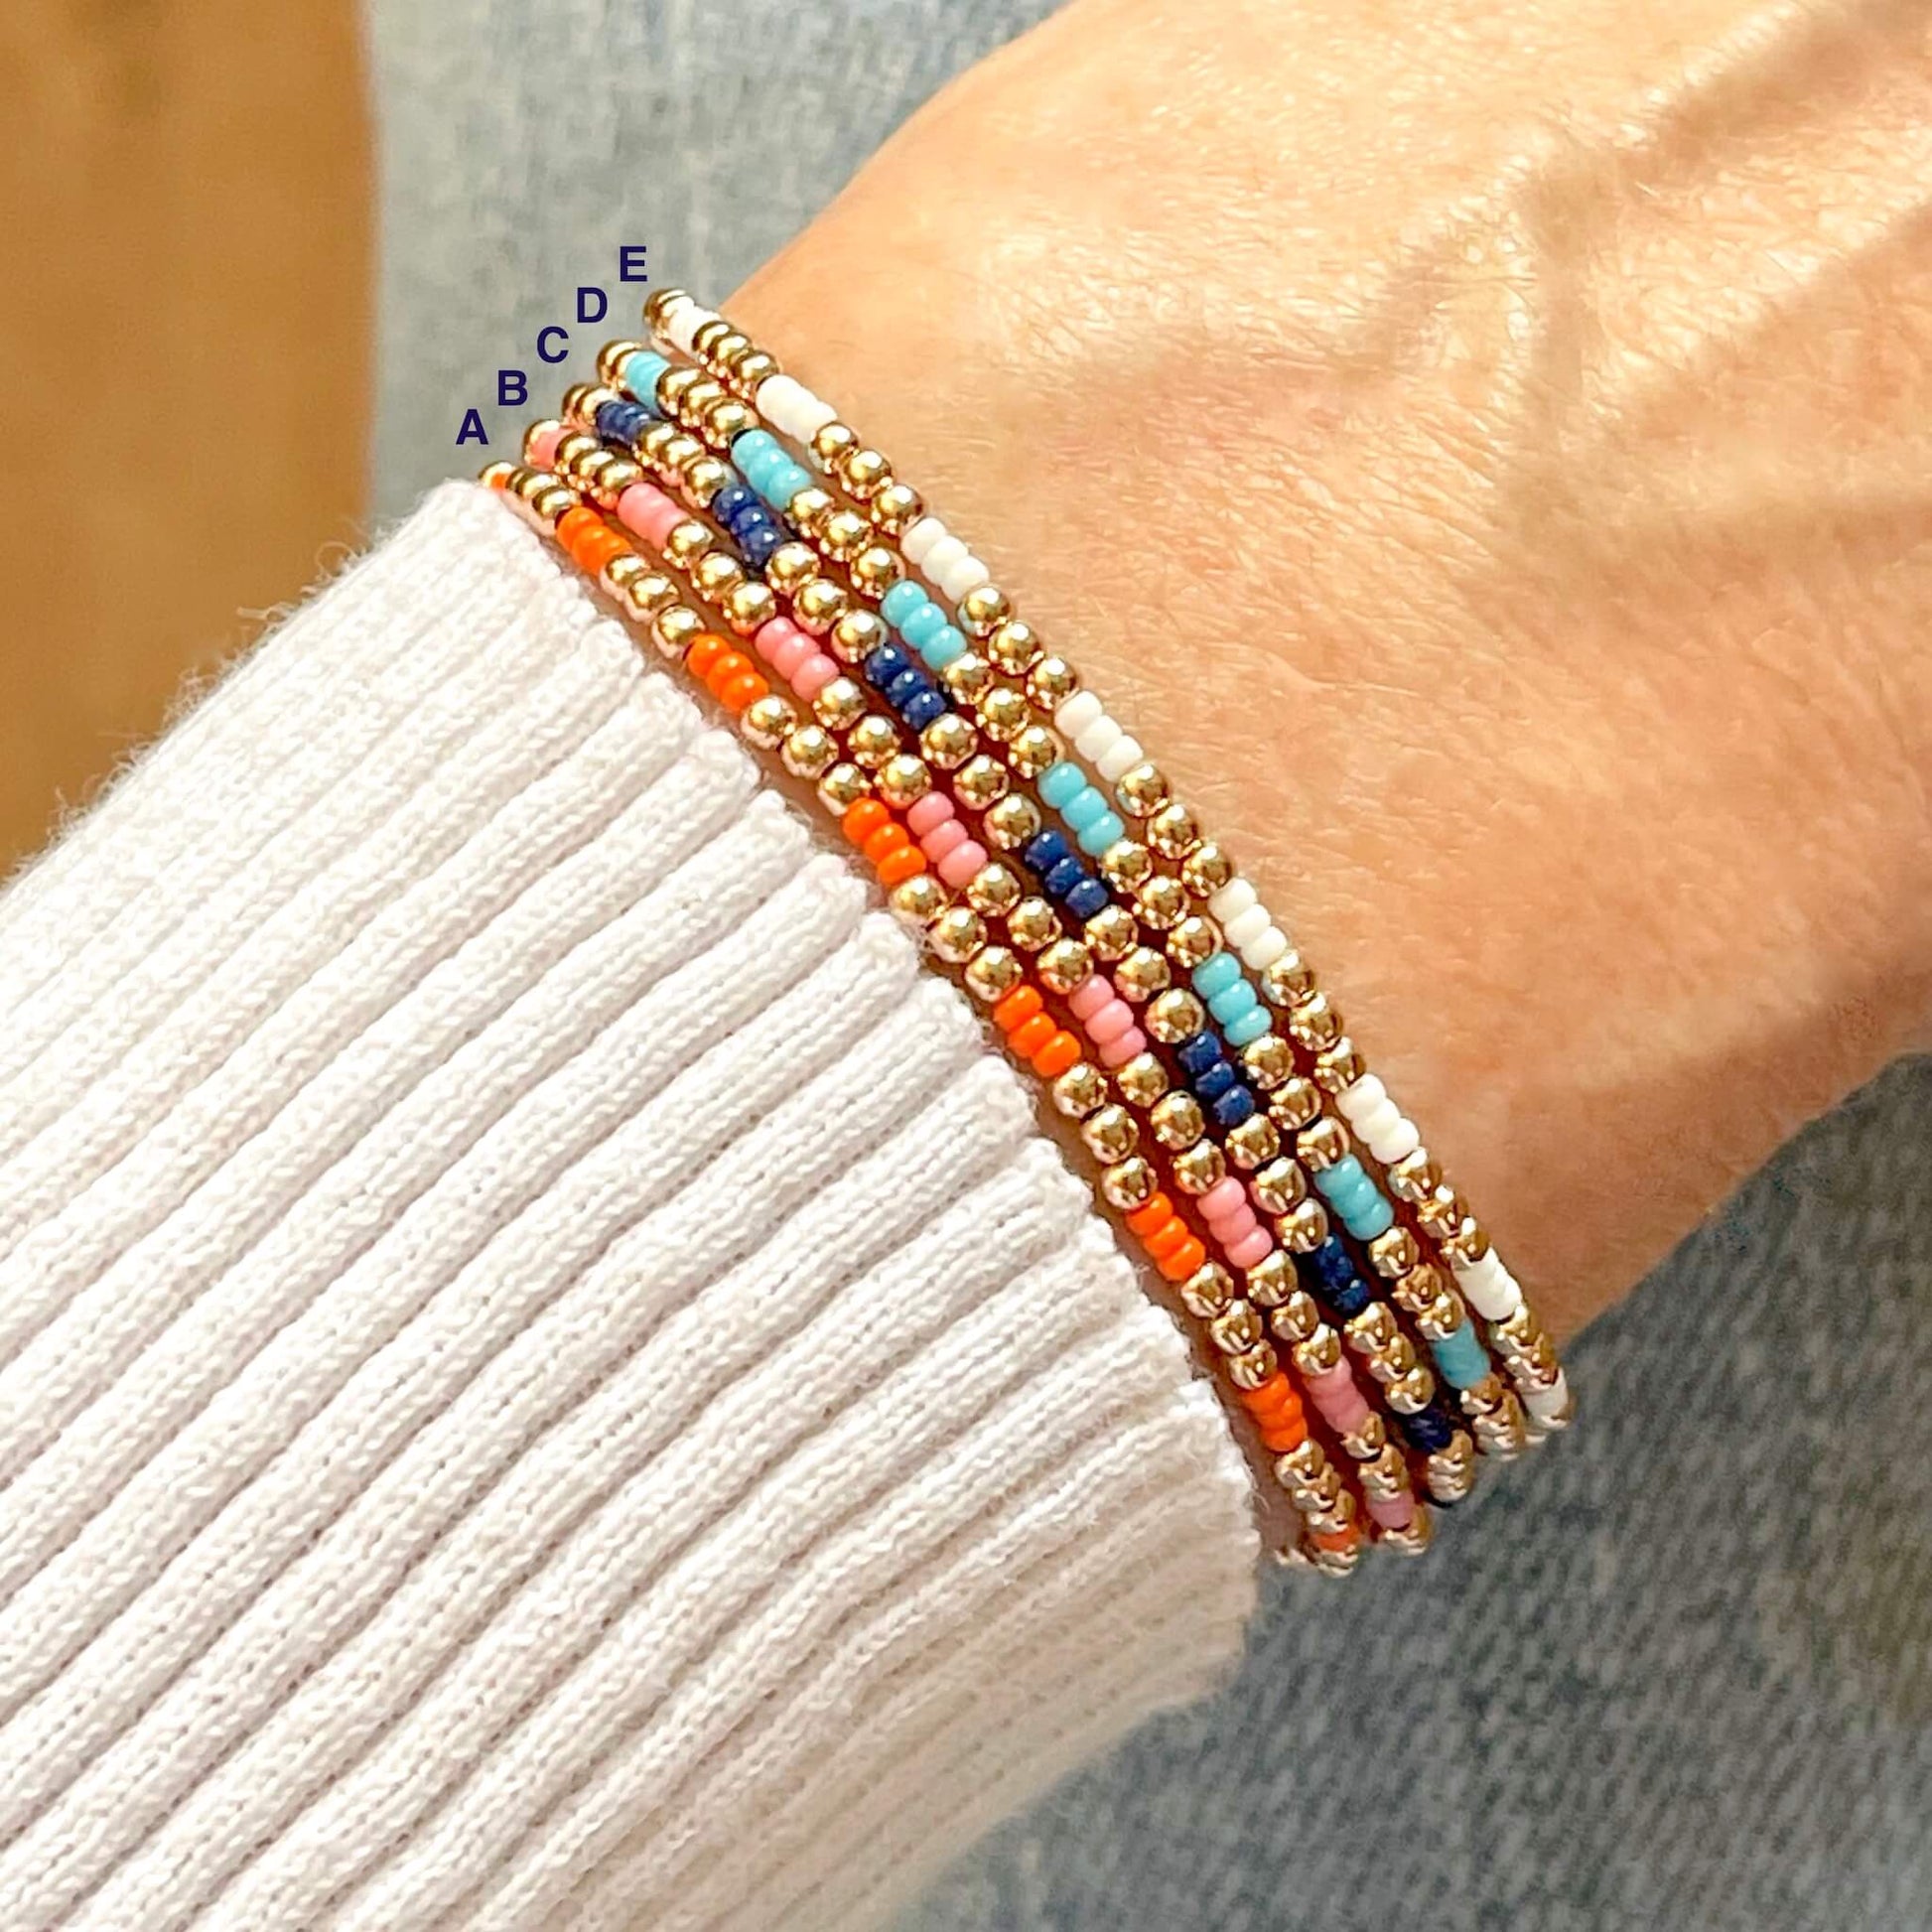 Small beaded stretch bracelets with colorful seed beads and rose gold 2mm beads. Available in orange, pink, blue, or white.